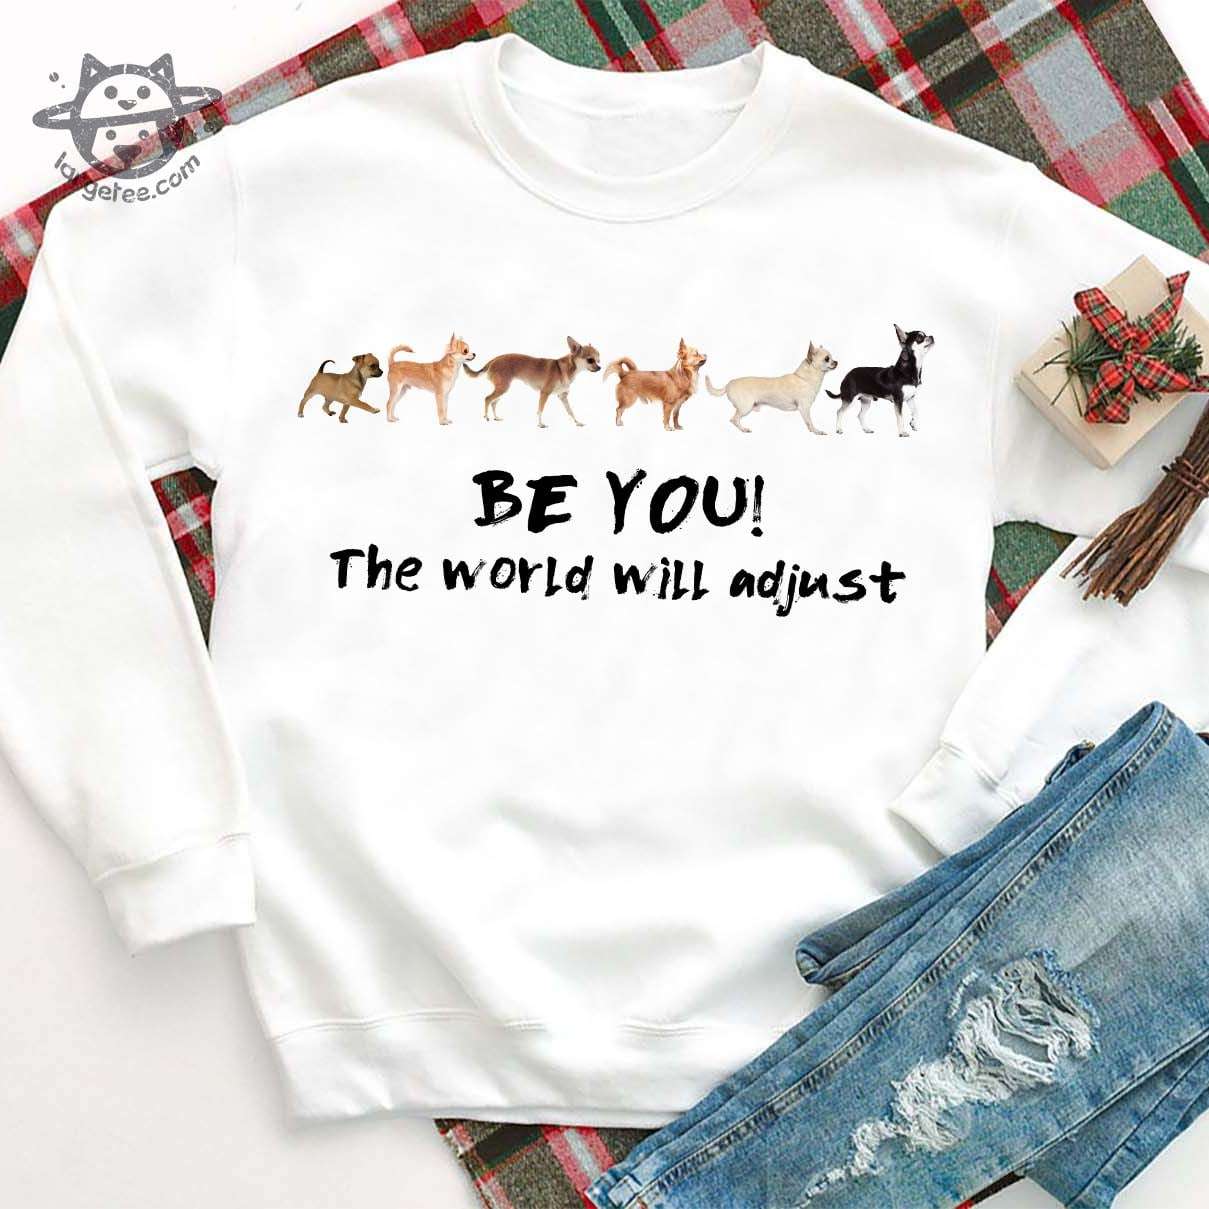 Chihuahua Dog, Dog Lover - Be you! The world will adjust